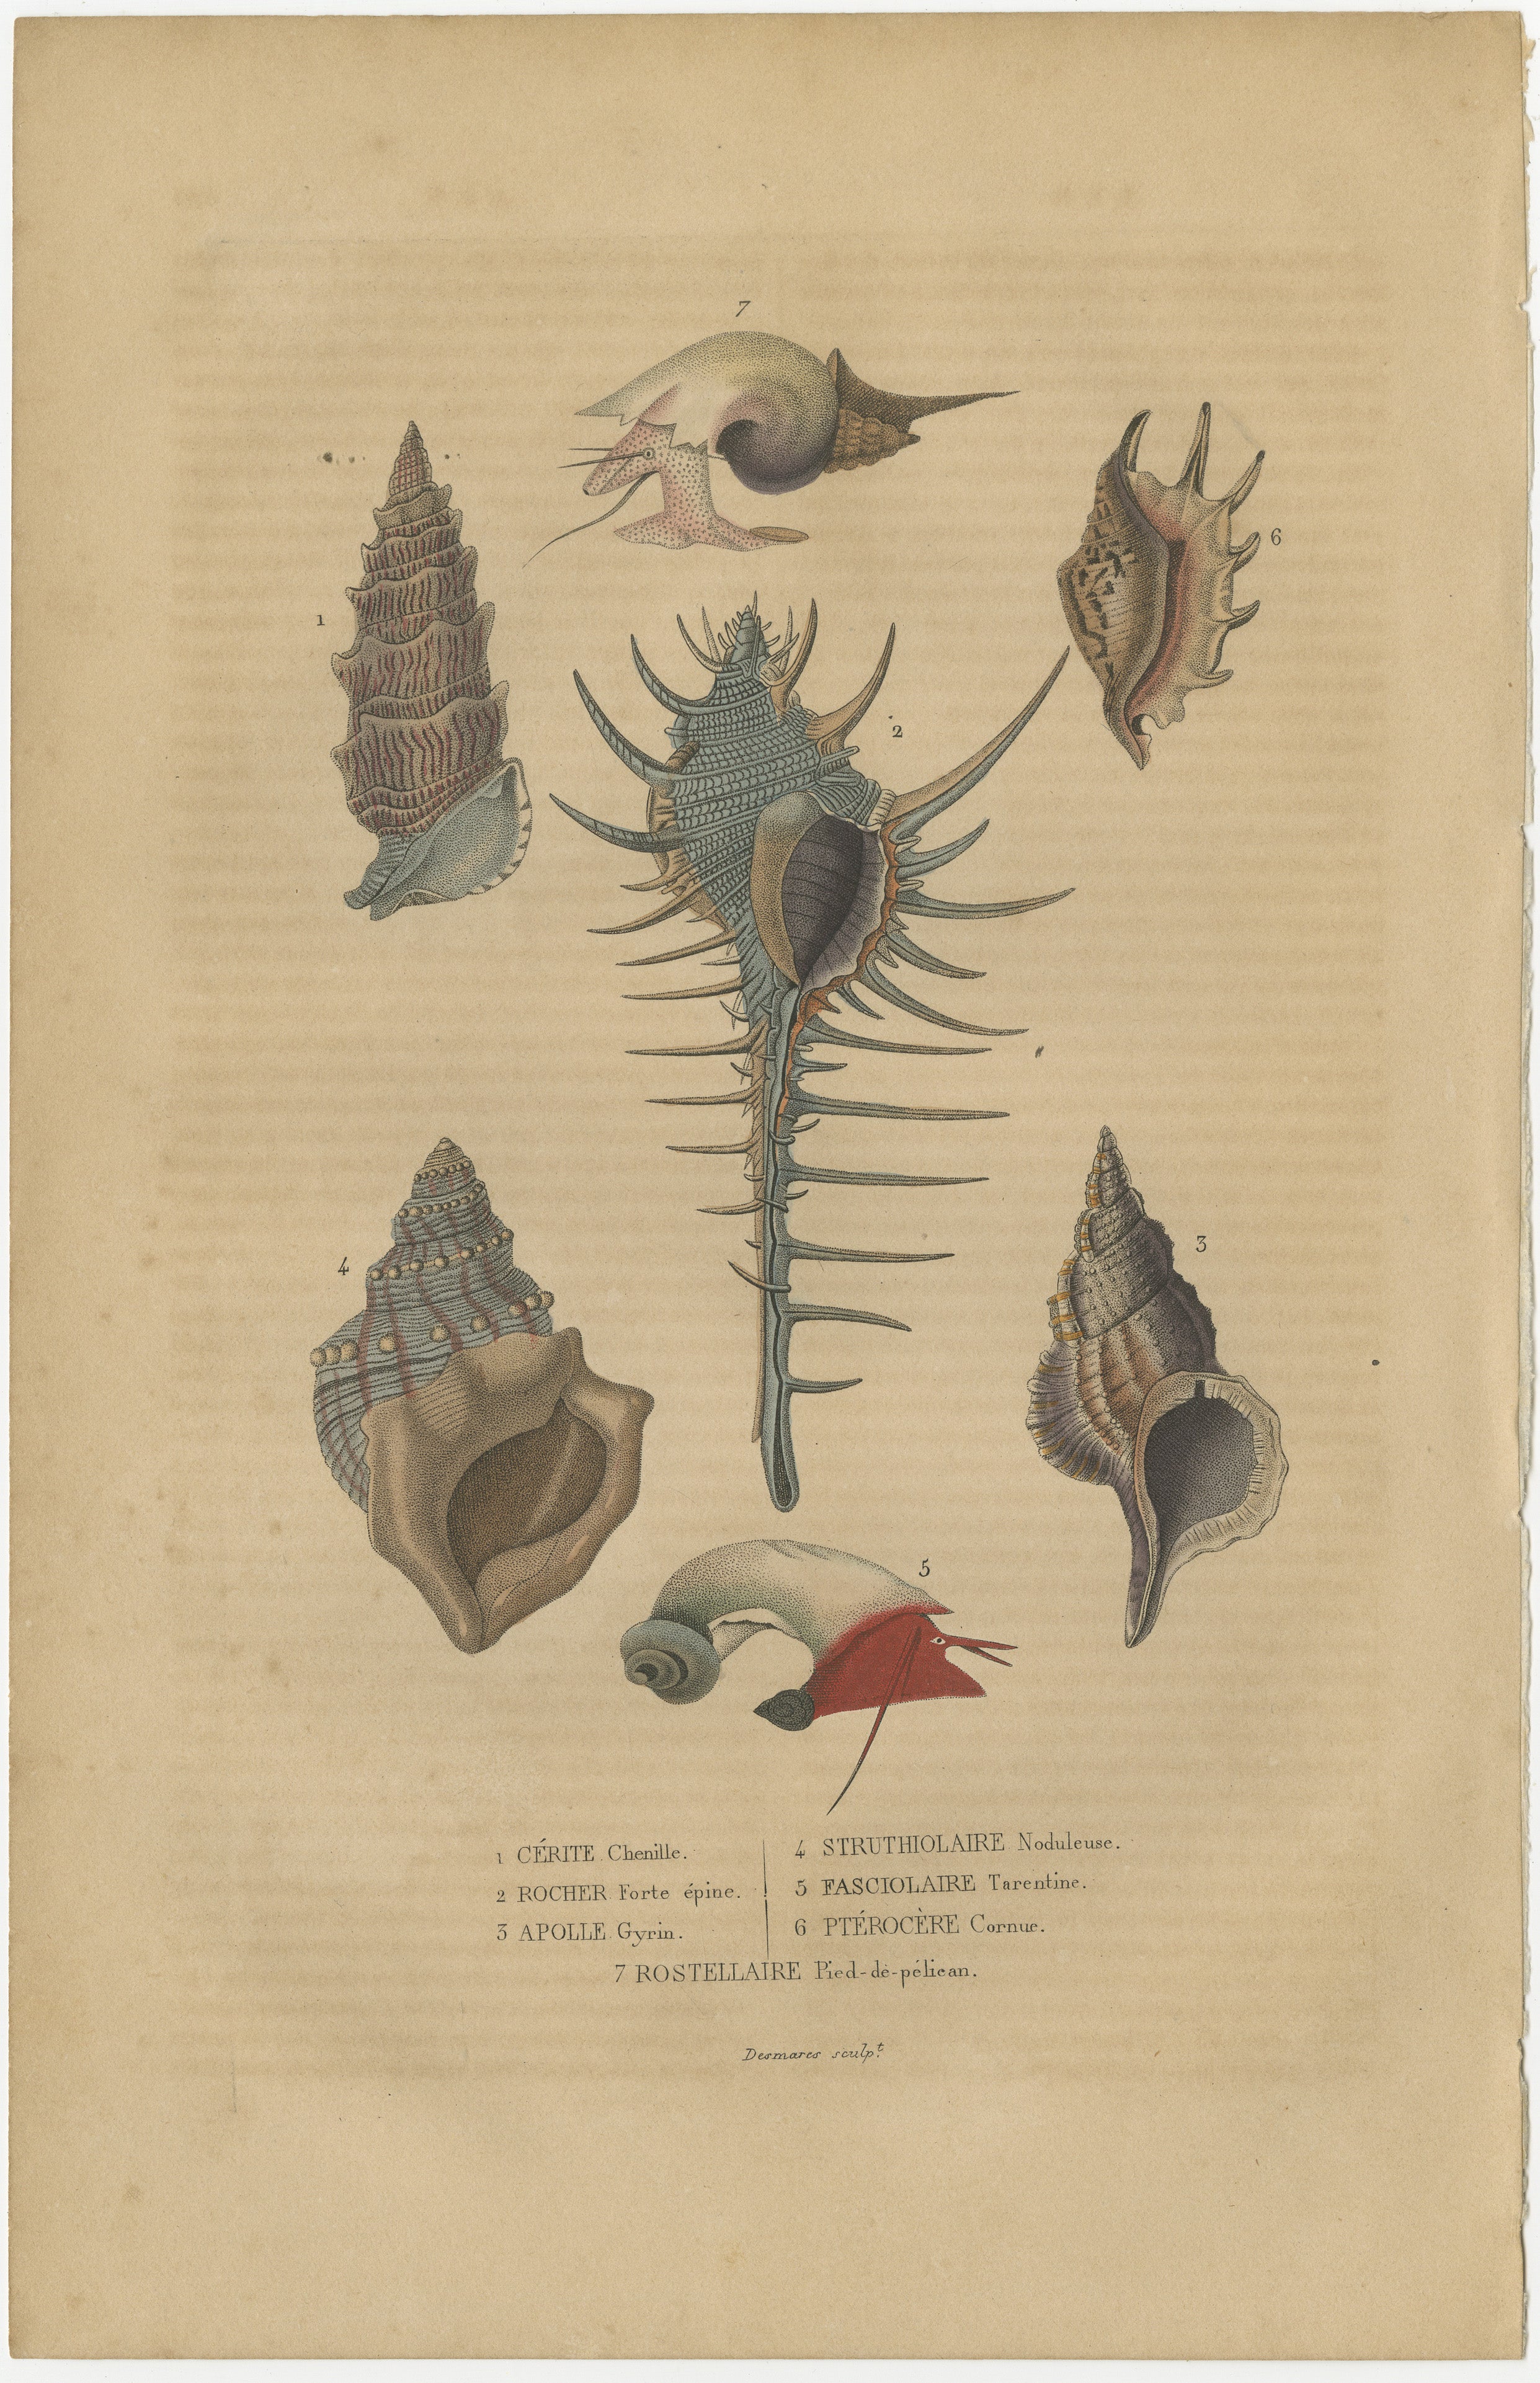 The print features a collection of marine gastropod mollusks, more commonly known as snails, each with distinctive shell shapes and ornamentations:

1. **Cérith (Cerithium)**: This is likely a depiction of a cerith, a type of sea snail with a